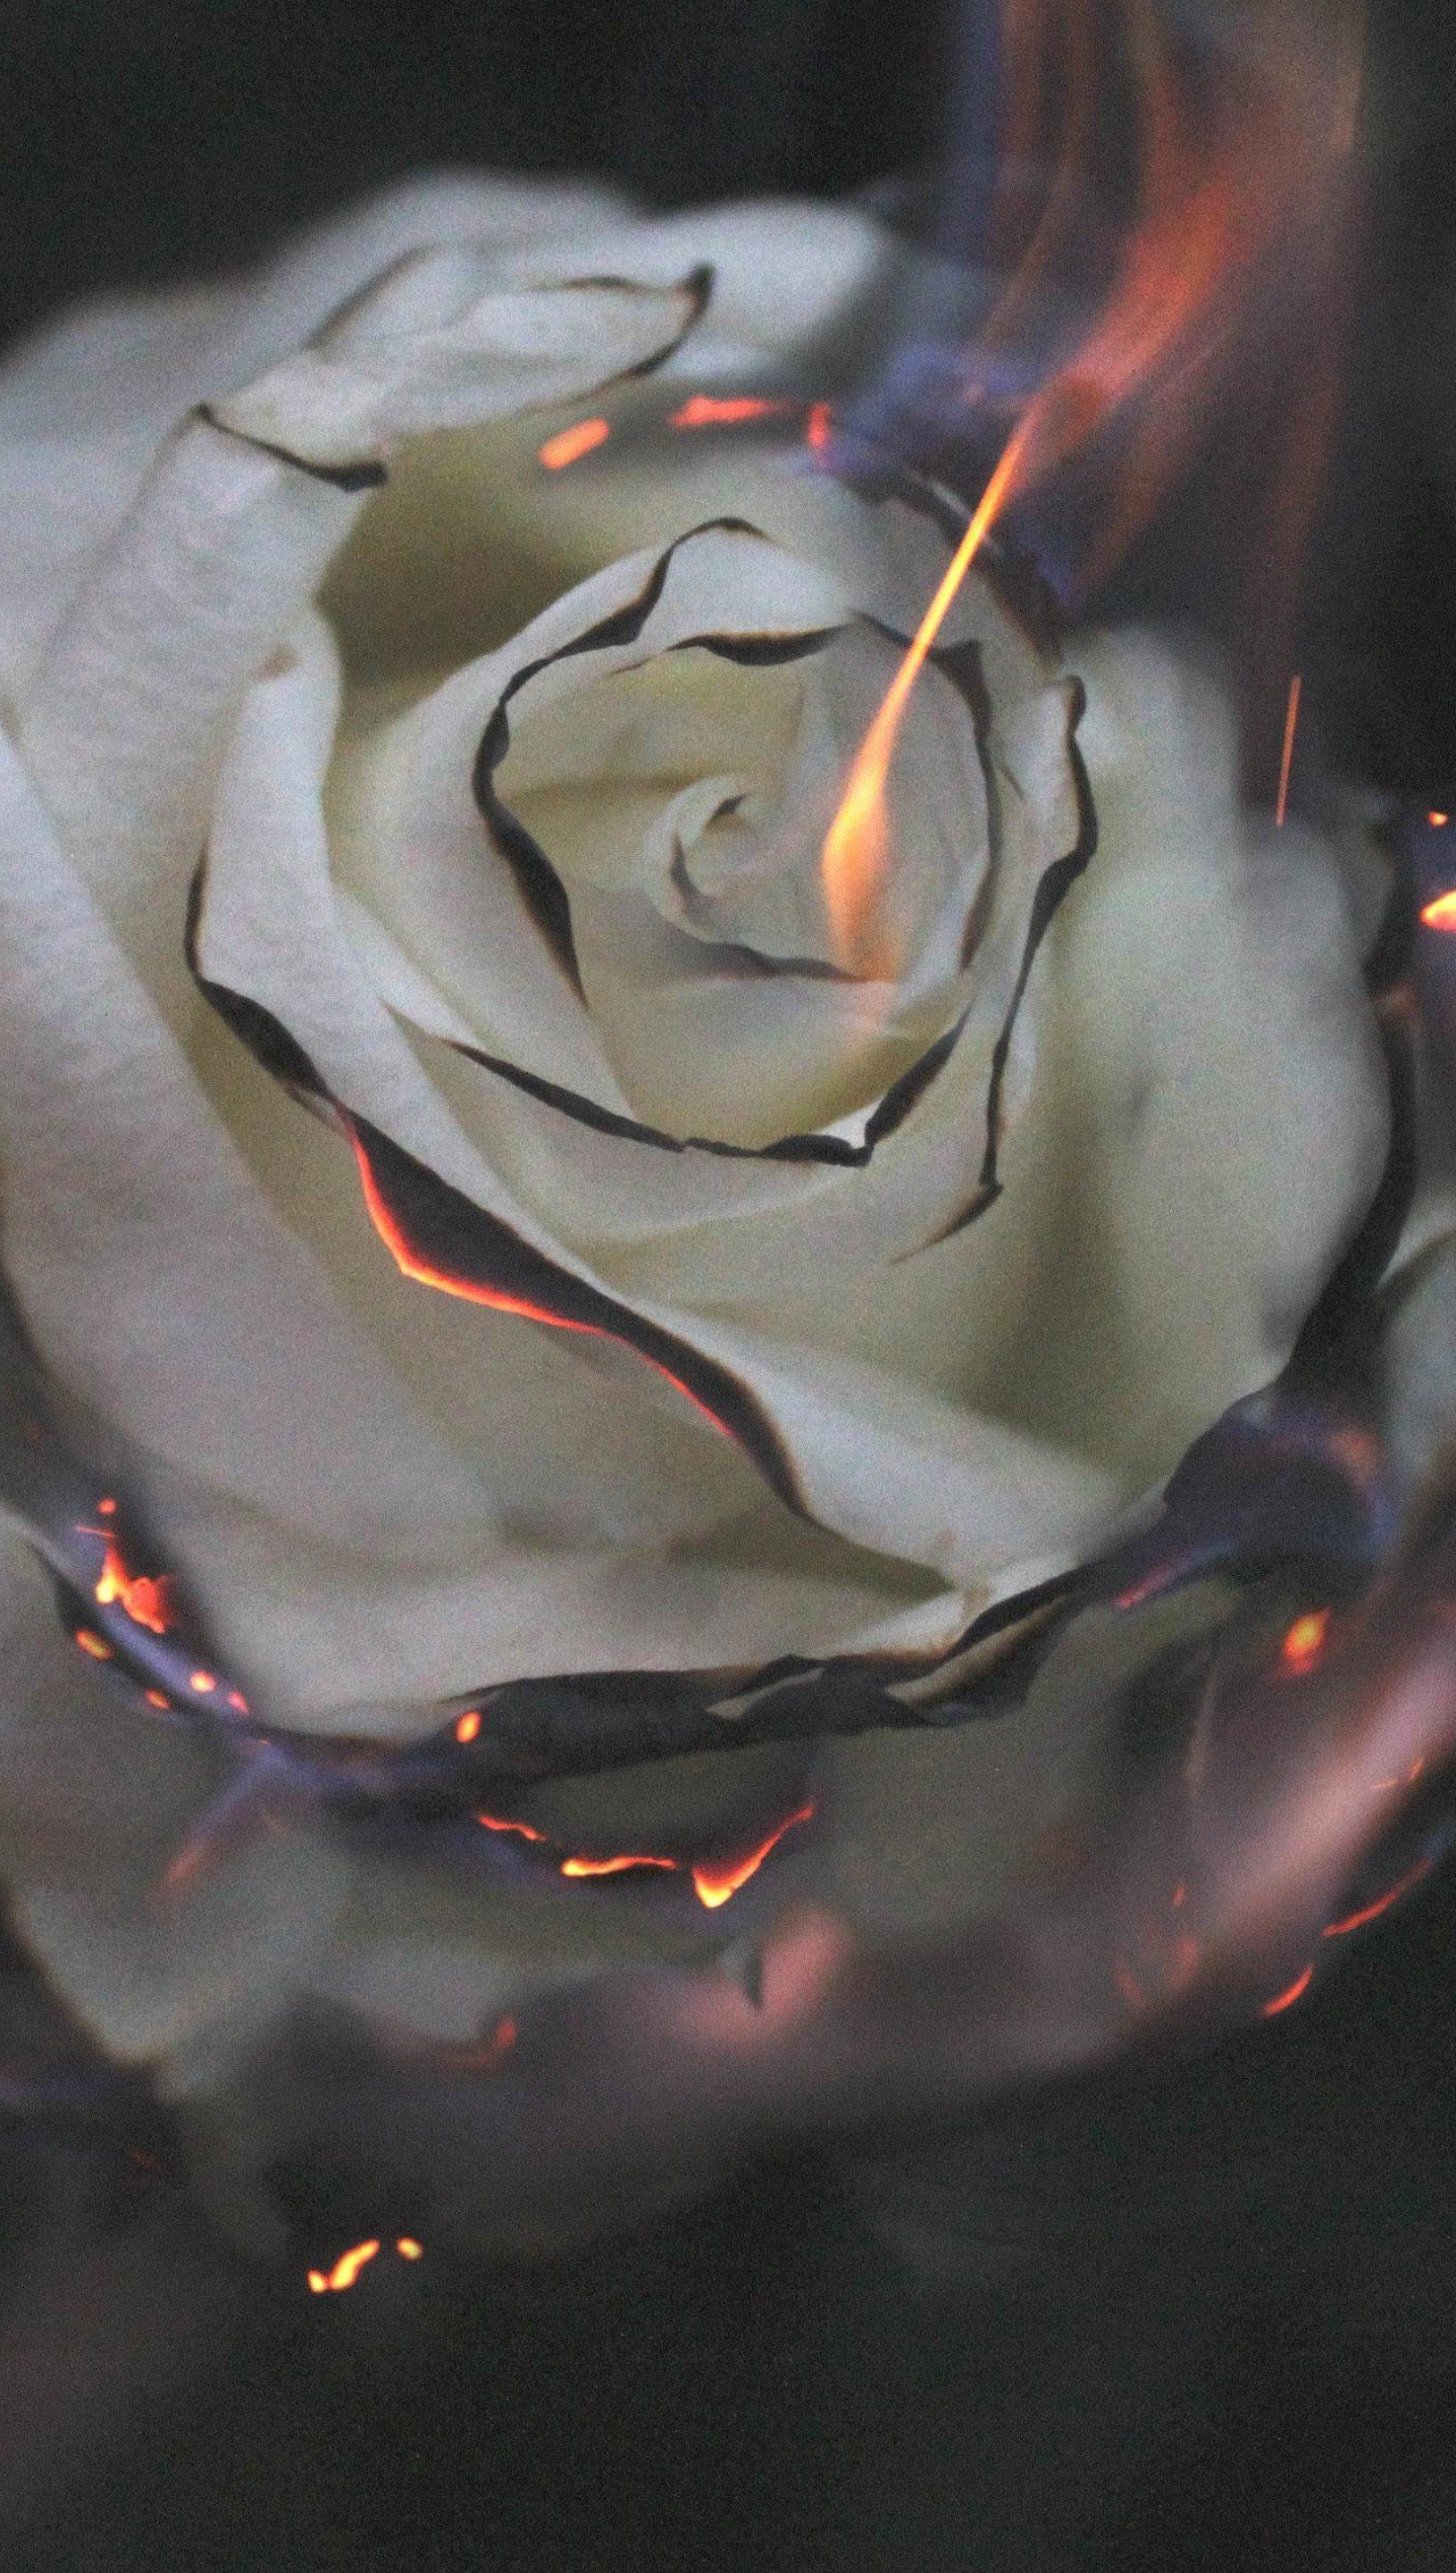 A white rose on fire - Roses